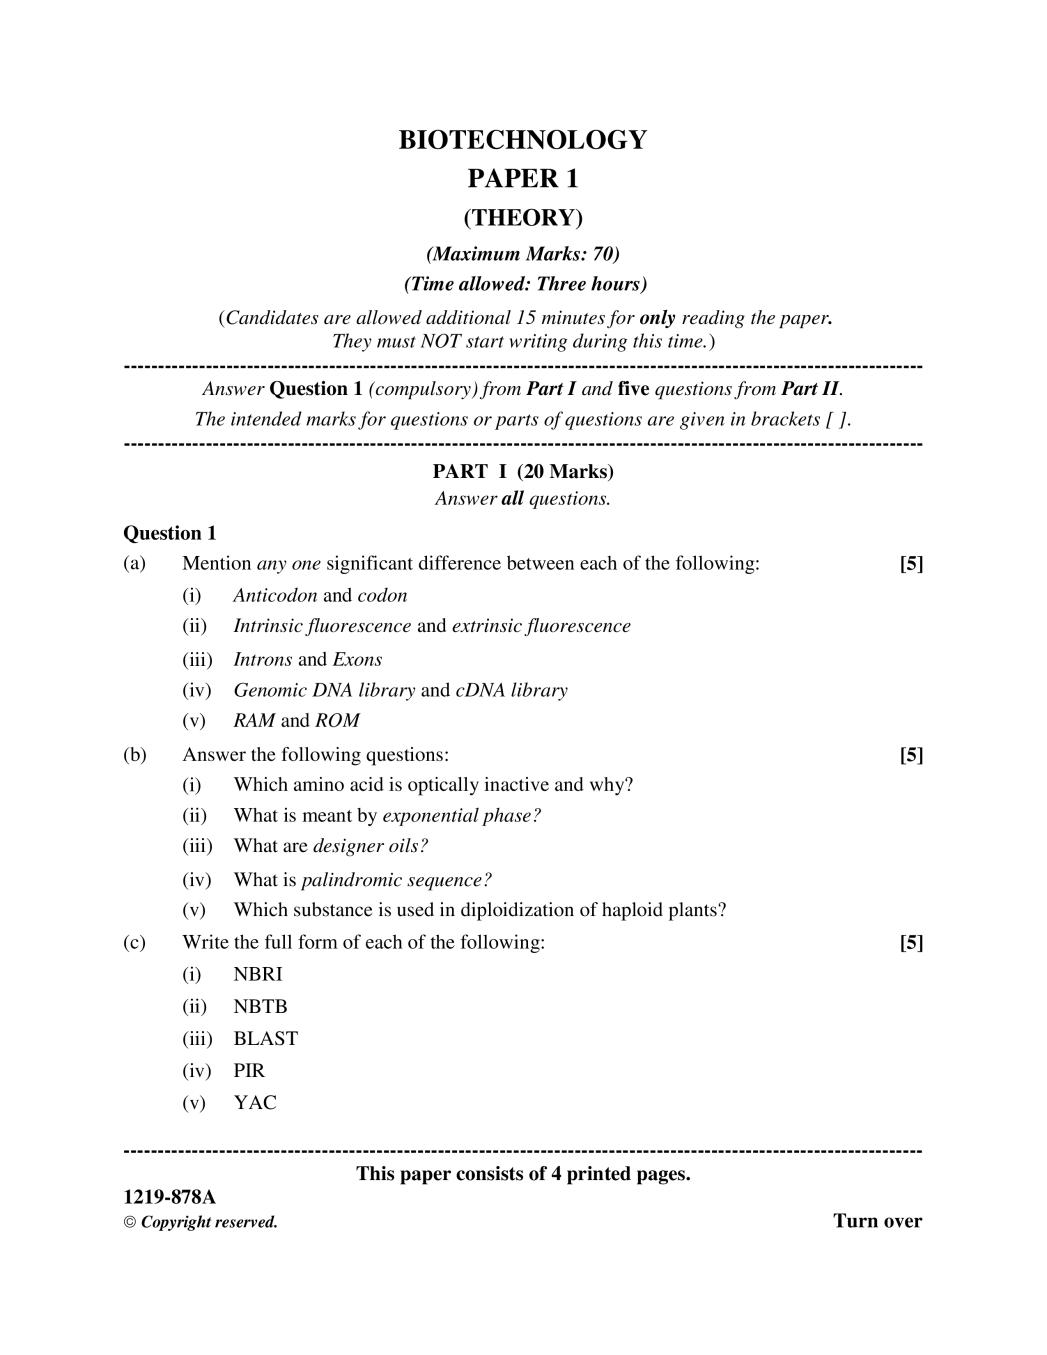 ISC Class 12 Question Paper 2019 for Biotechnology Paper 1 - Page 1